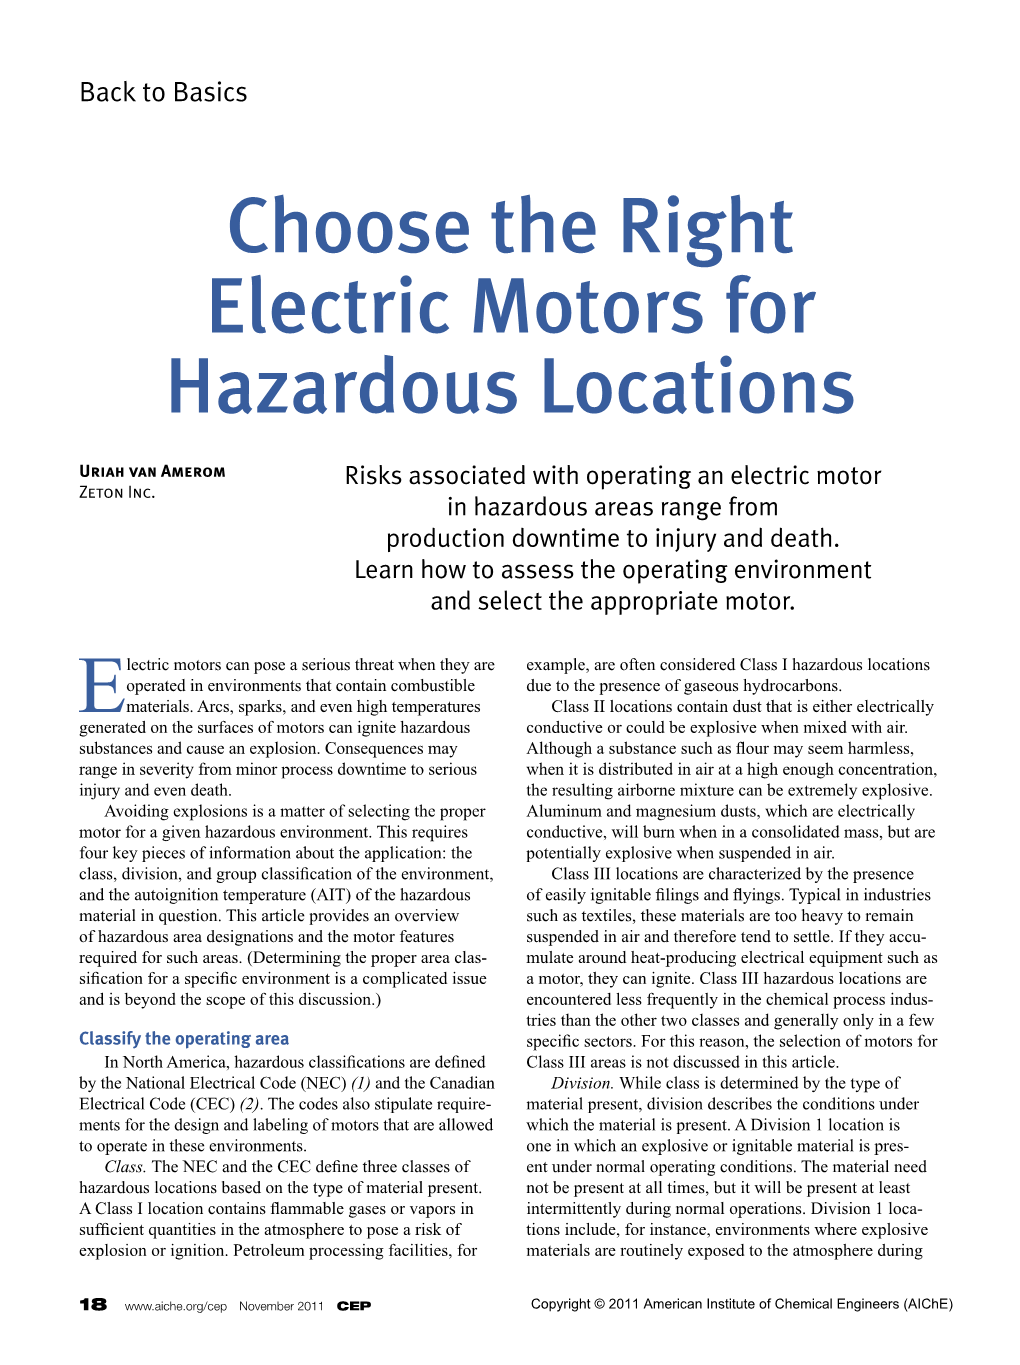 Choose the Right Electric Motors for Hazardous Locations